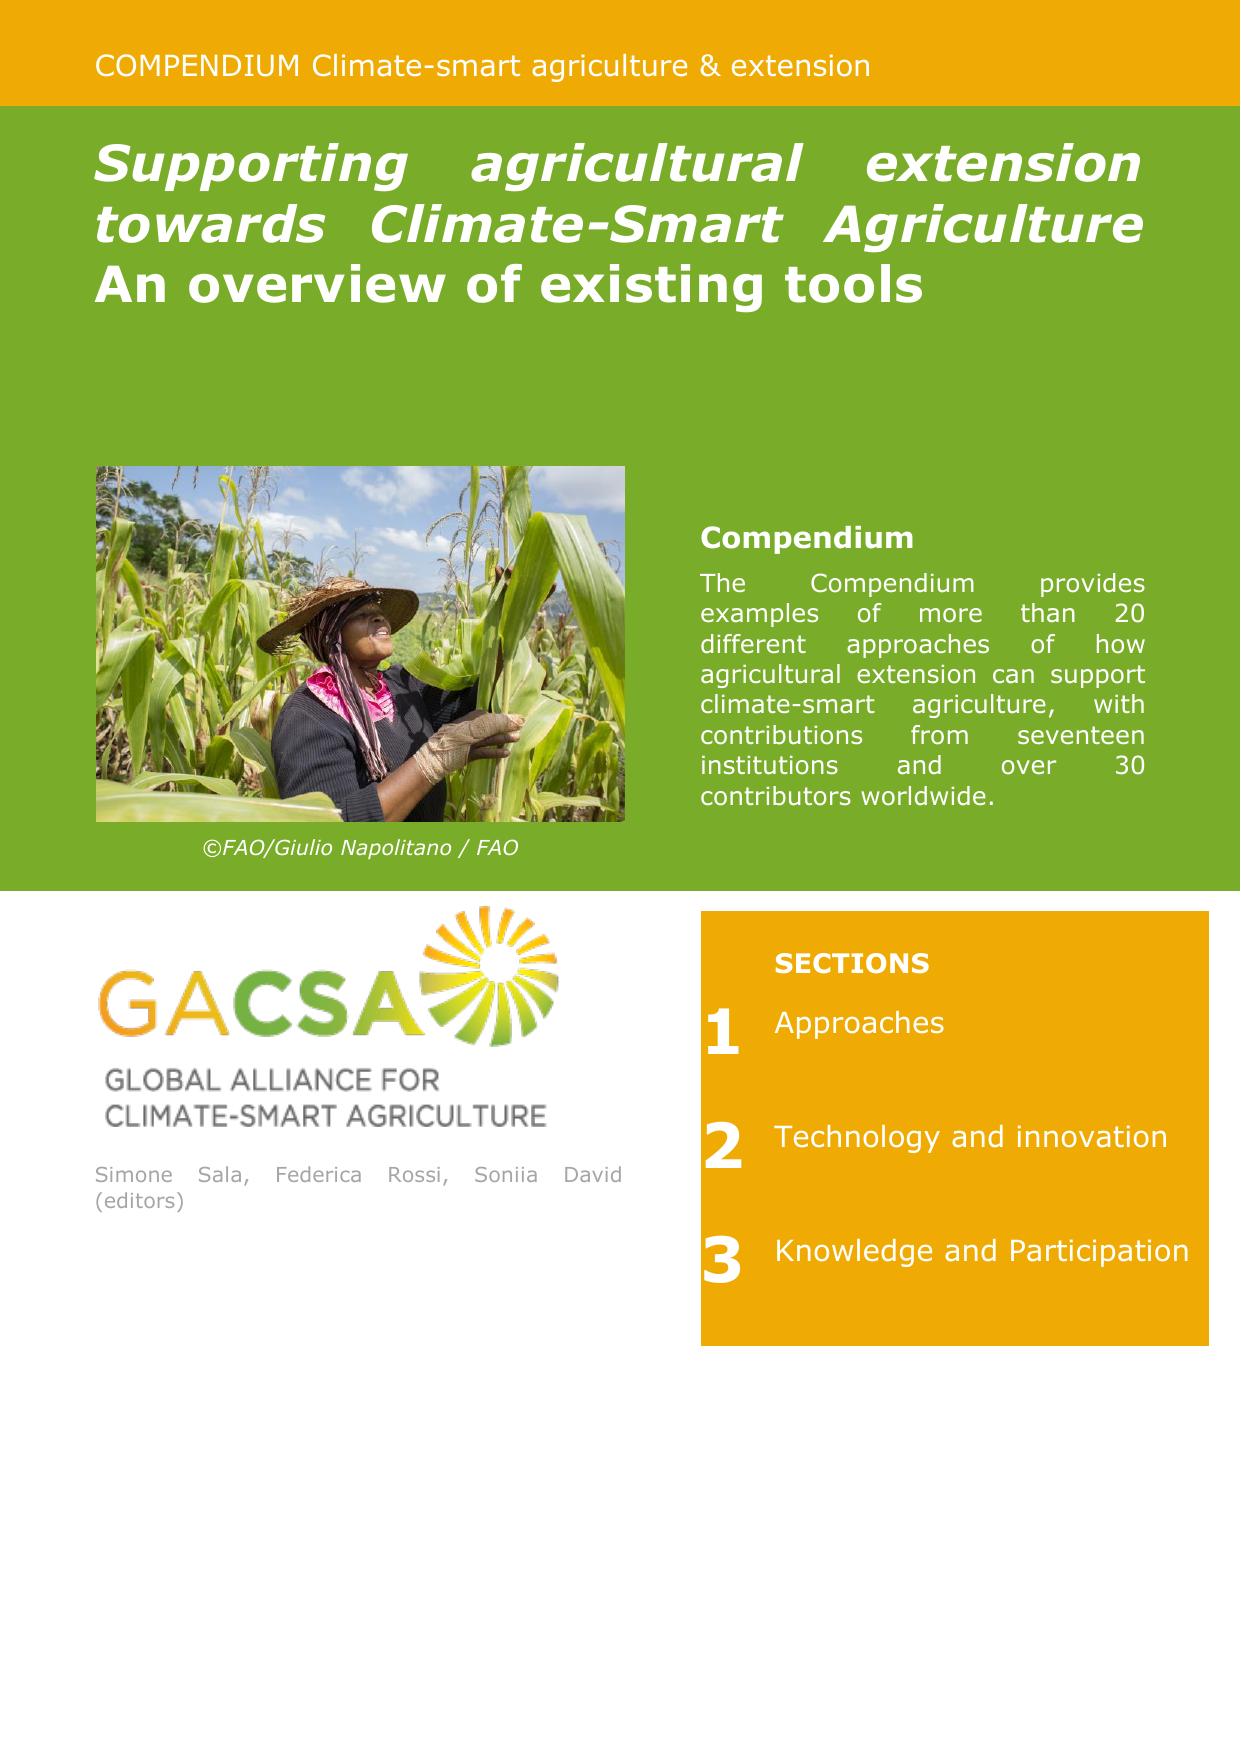 Supporting Agrictural extension towards climate-smart agriculture